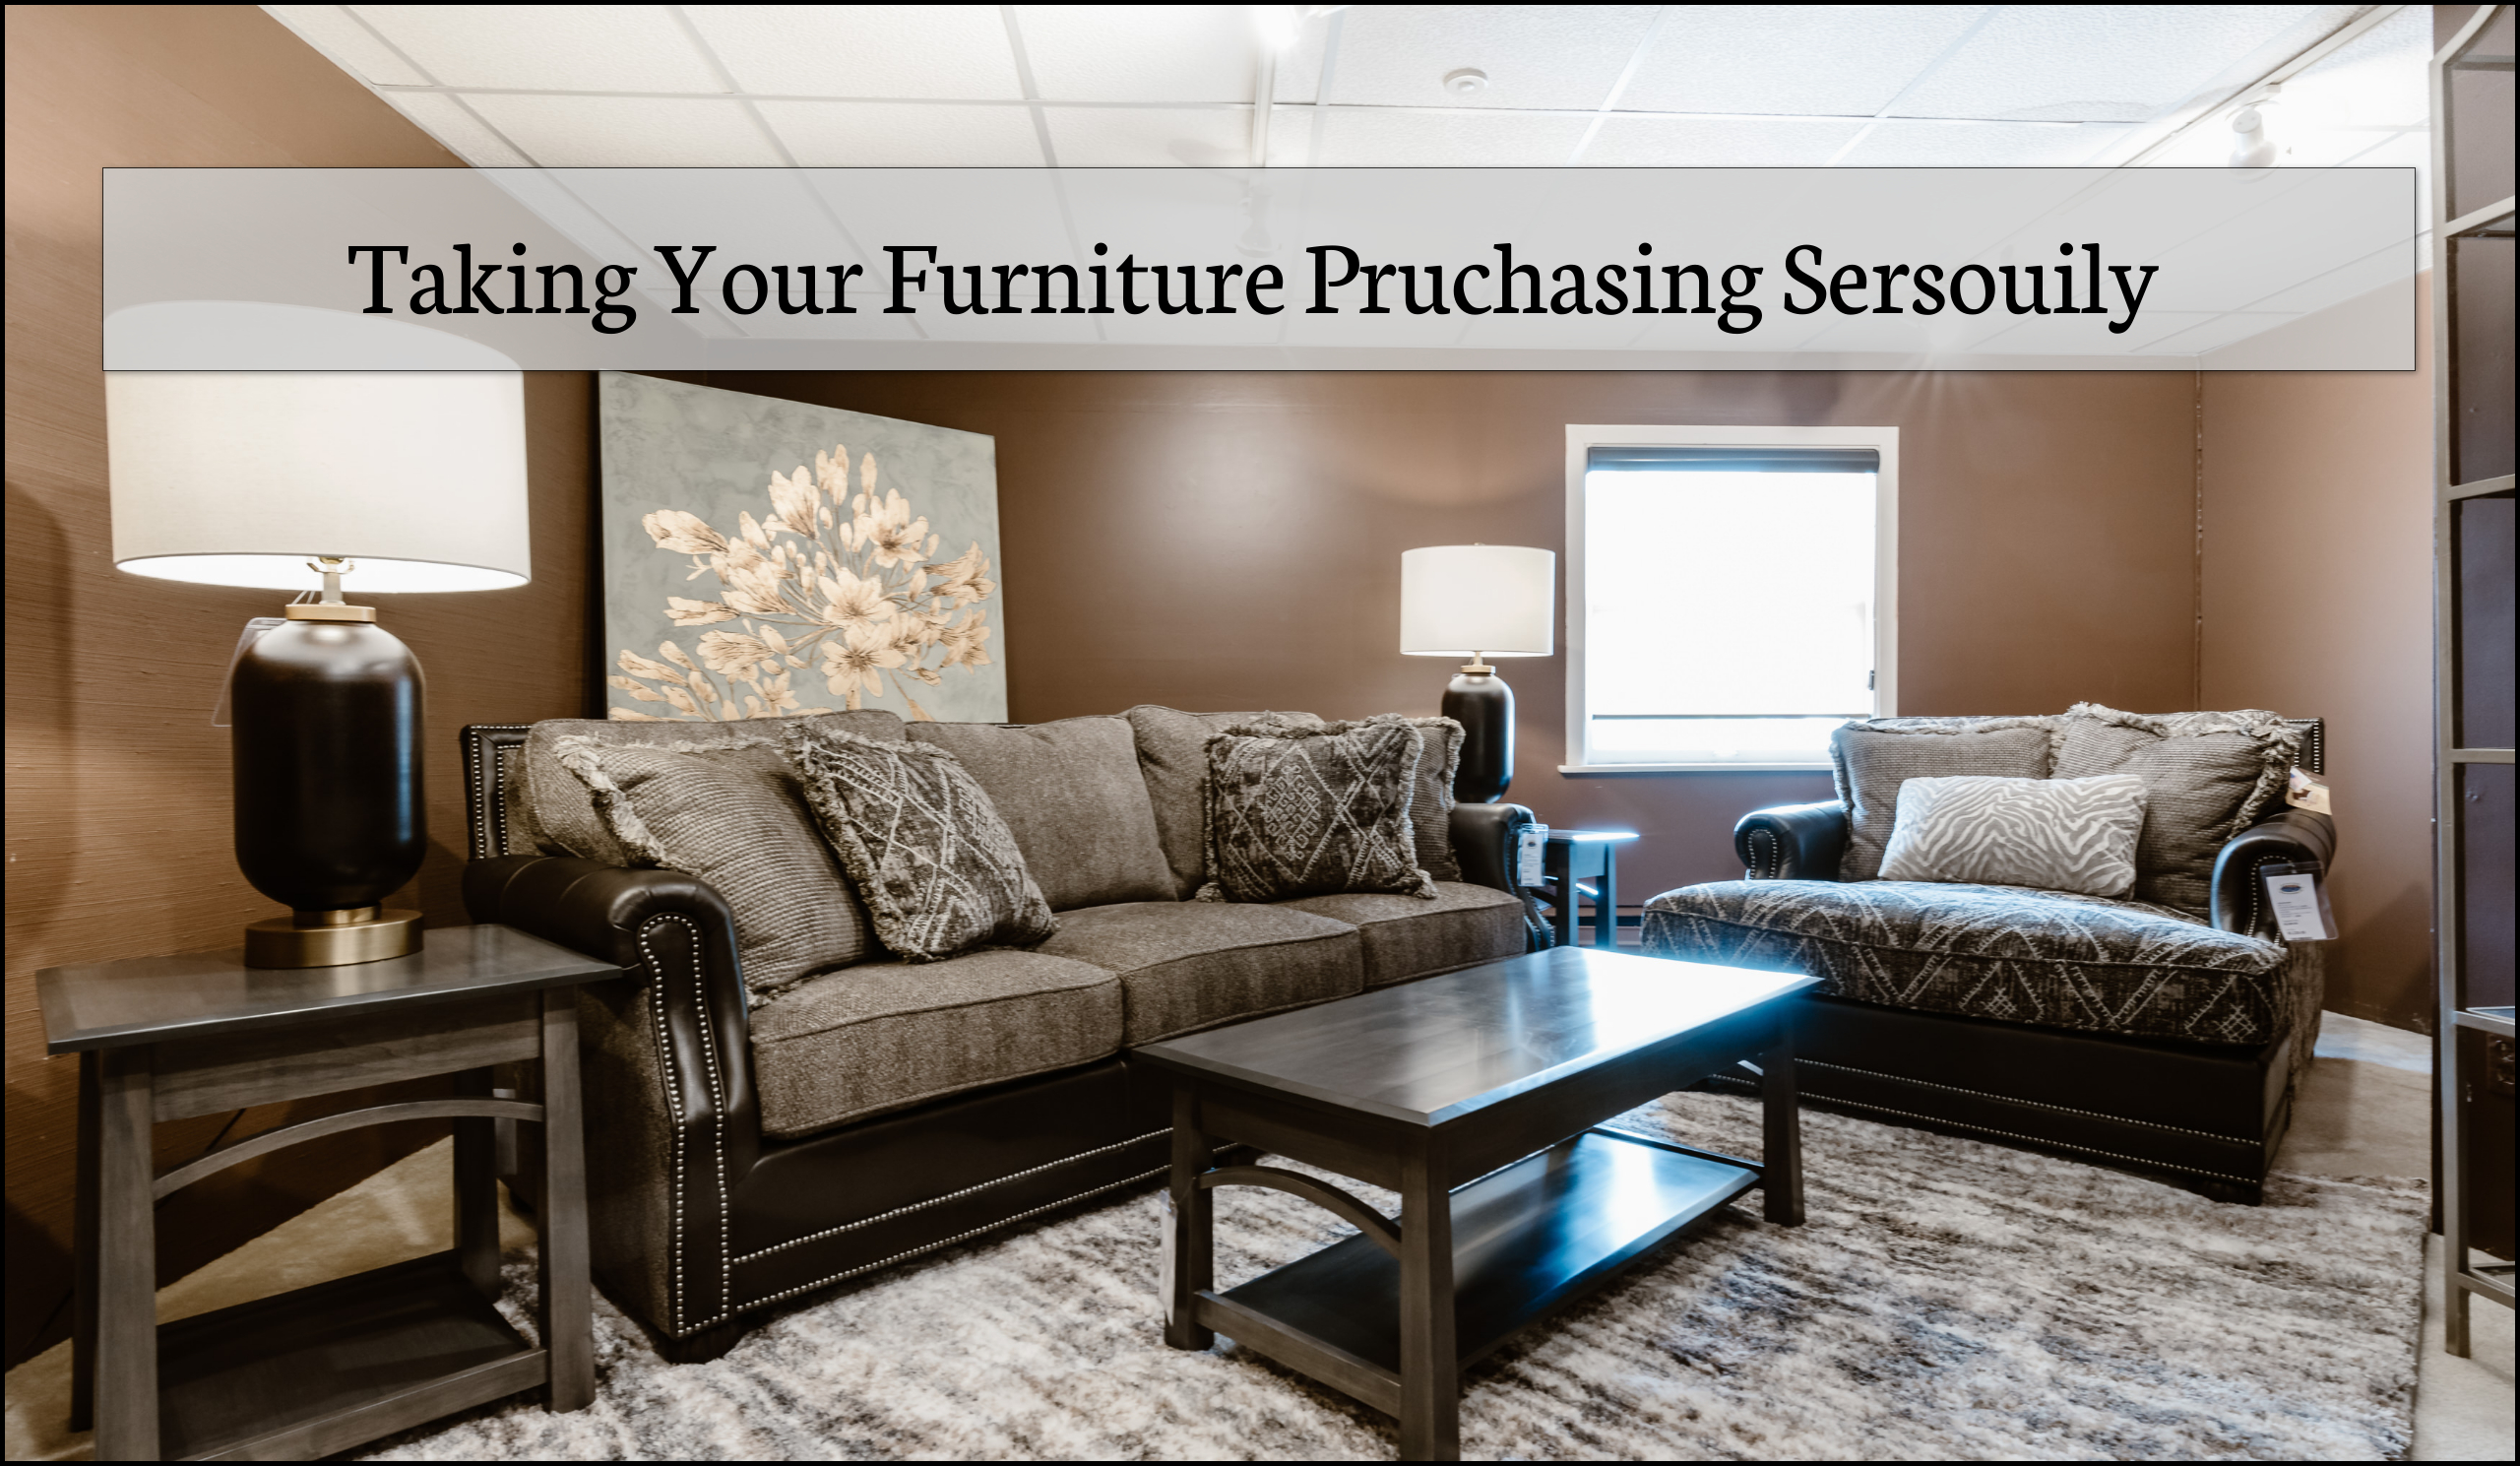 Why You Need To Take Your Furniture Purchase Seriously – Feb. 2021